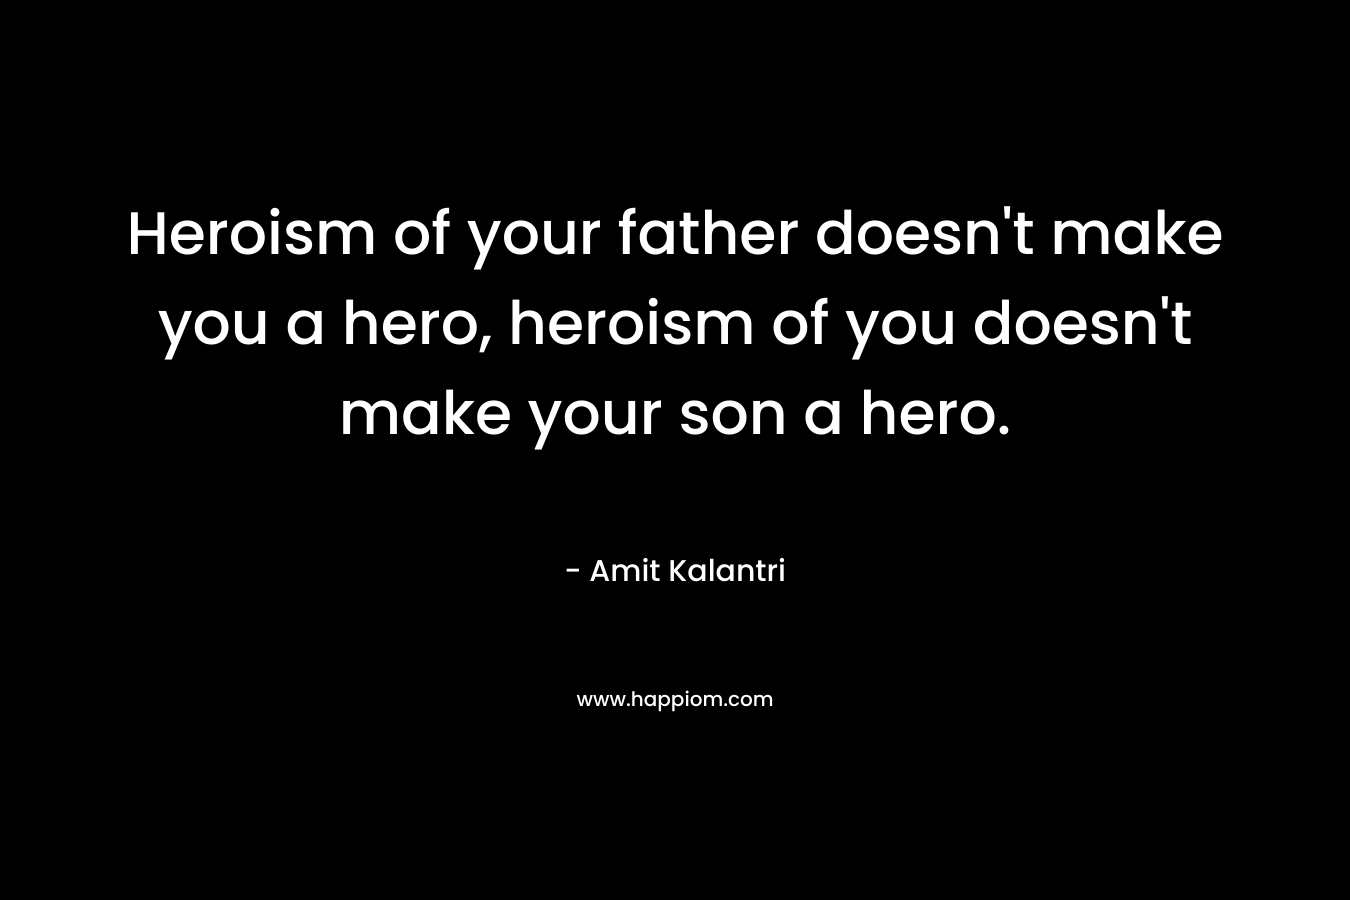 Heroism of your father doesn't make you a hero, heroism of you doesn't make your son a hero.